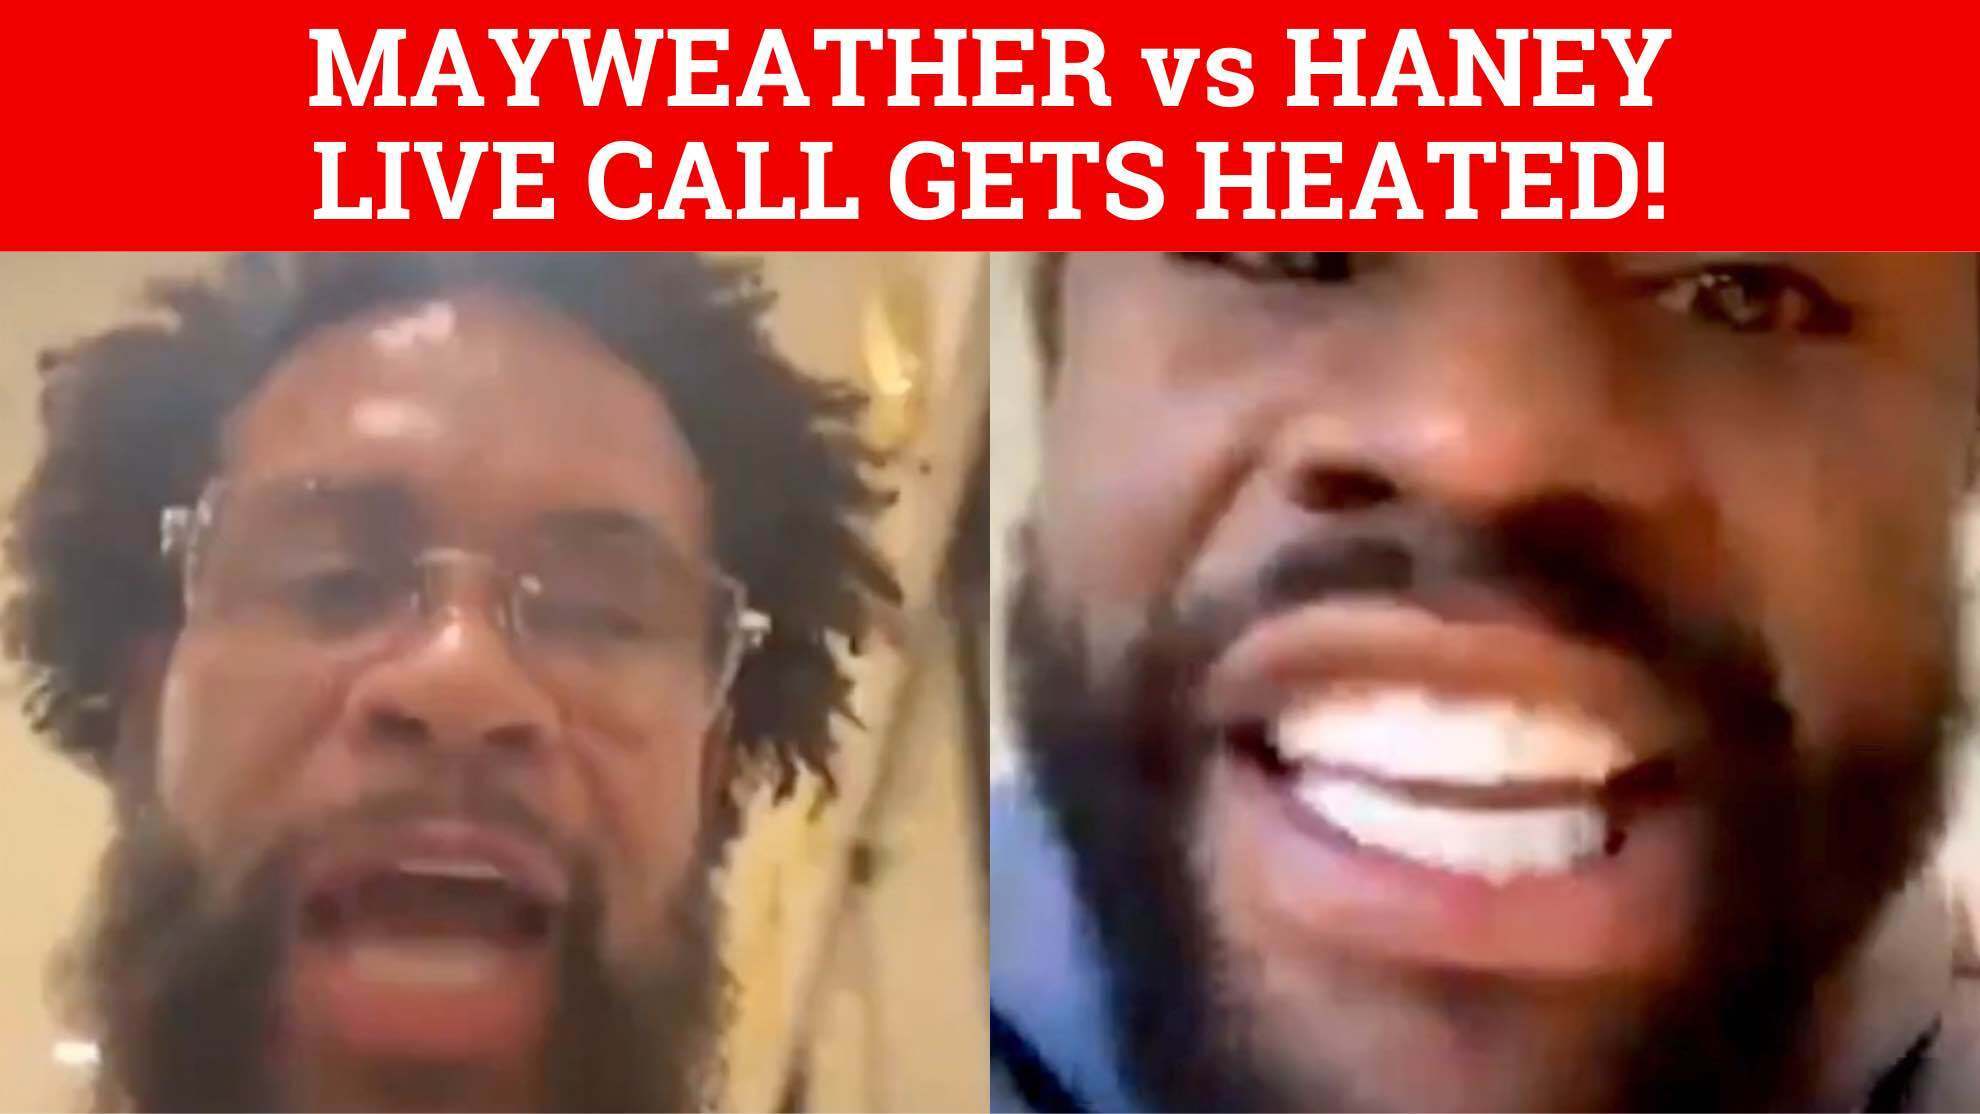 Bill Haney calls out Floyd Mayweathers boxing record and integrity to his face on Instagram live